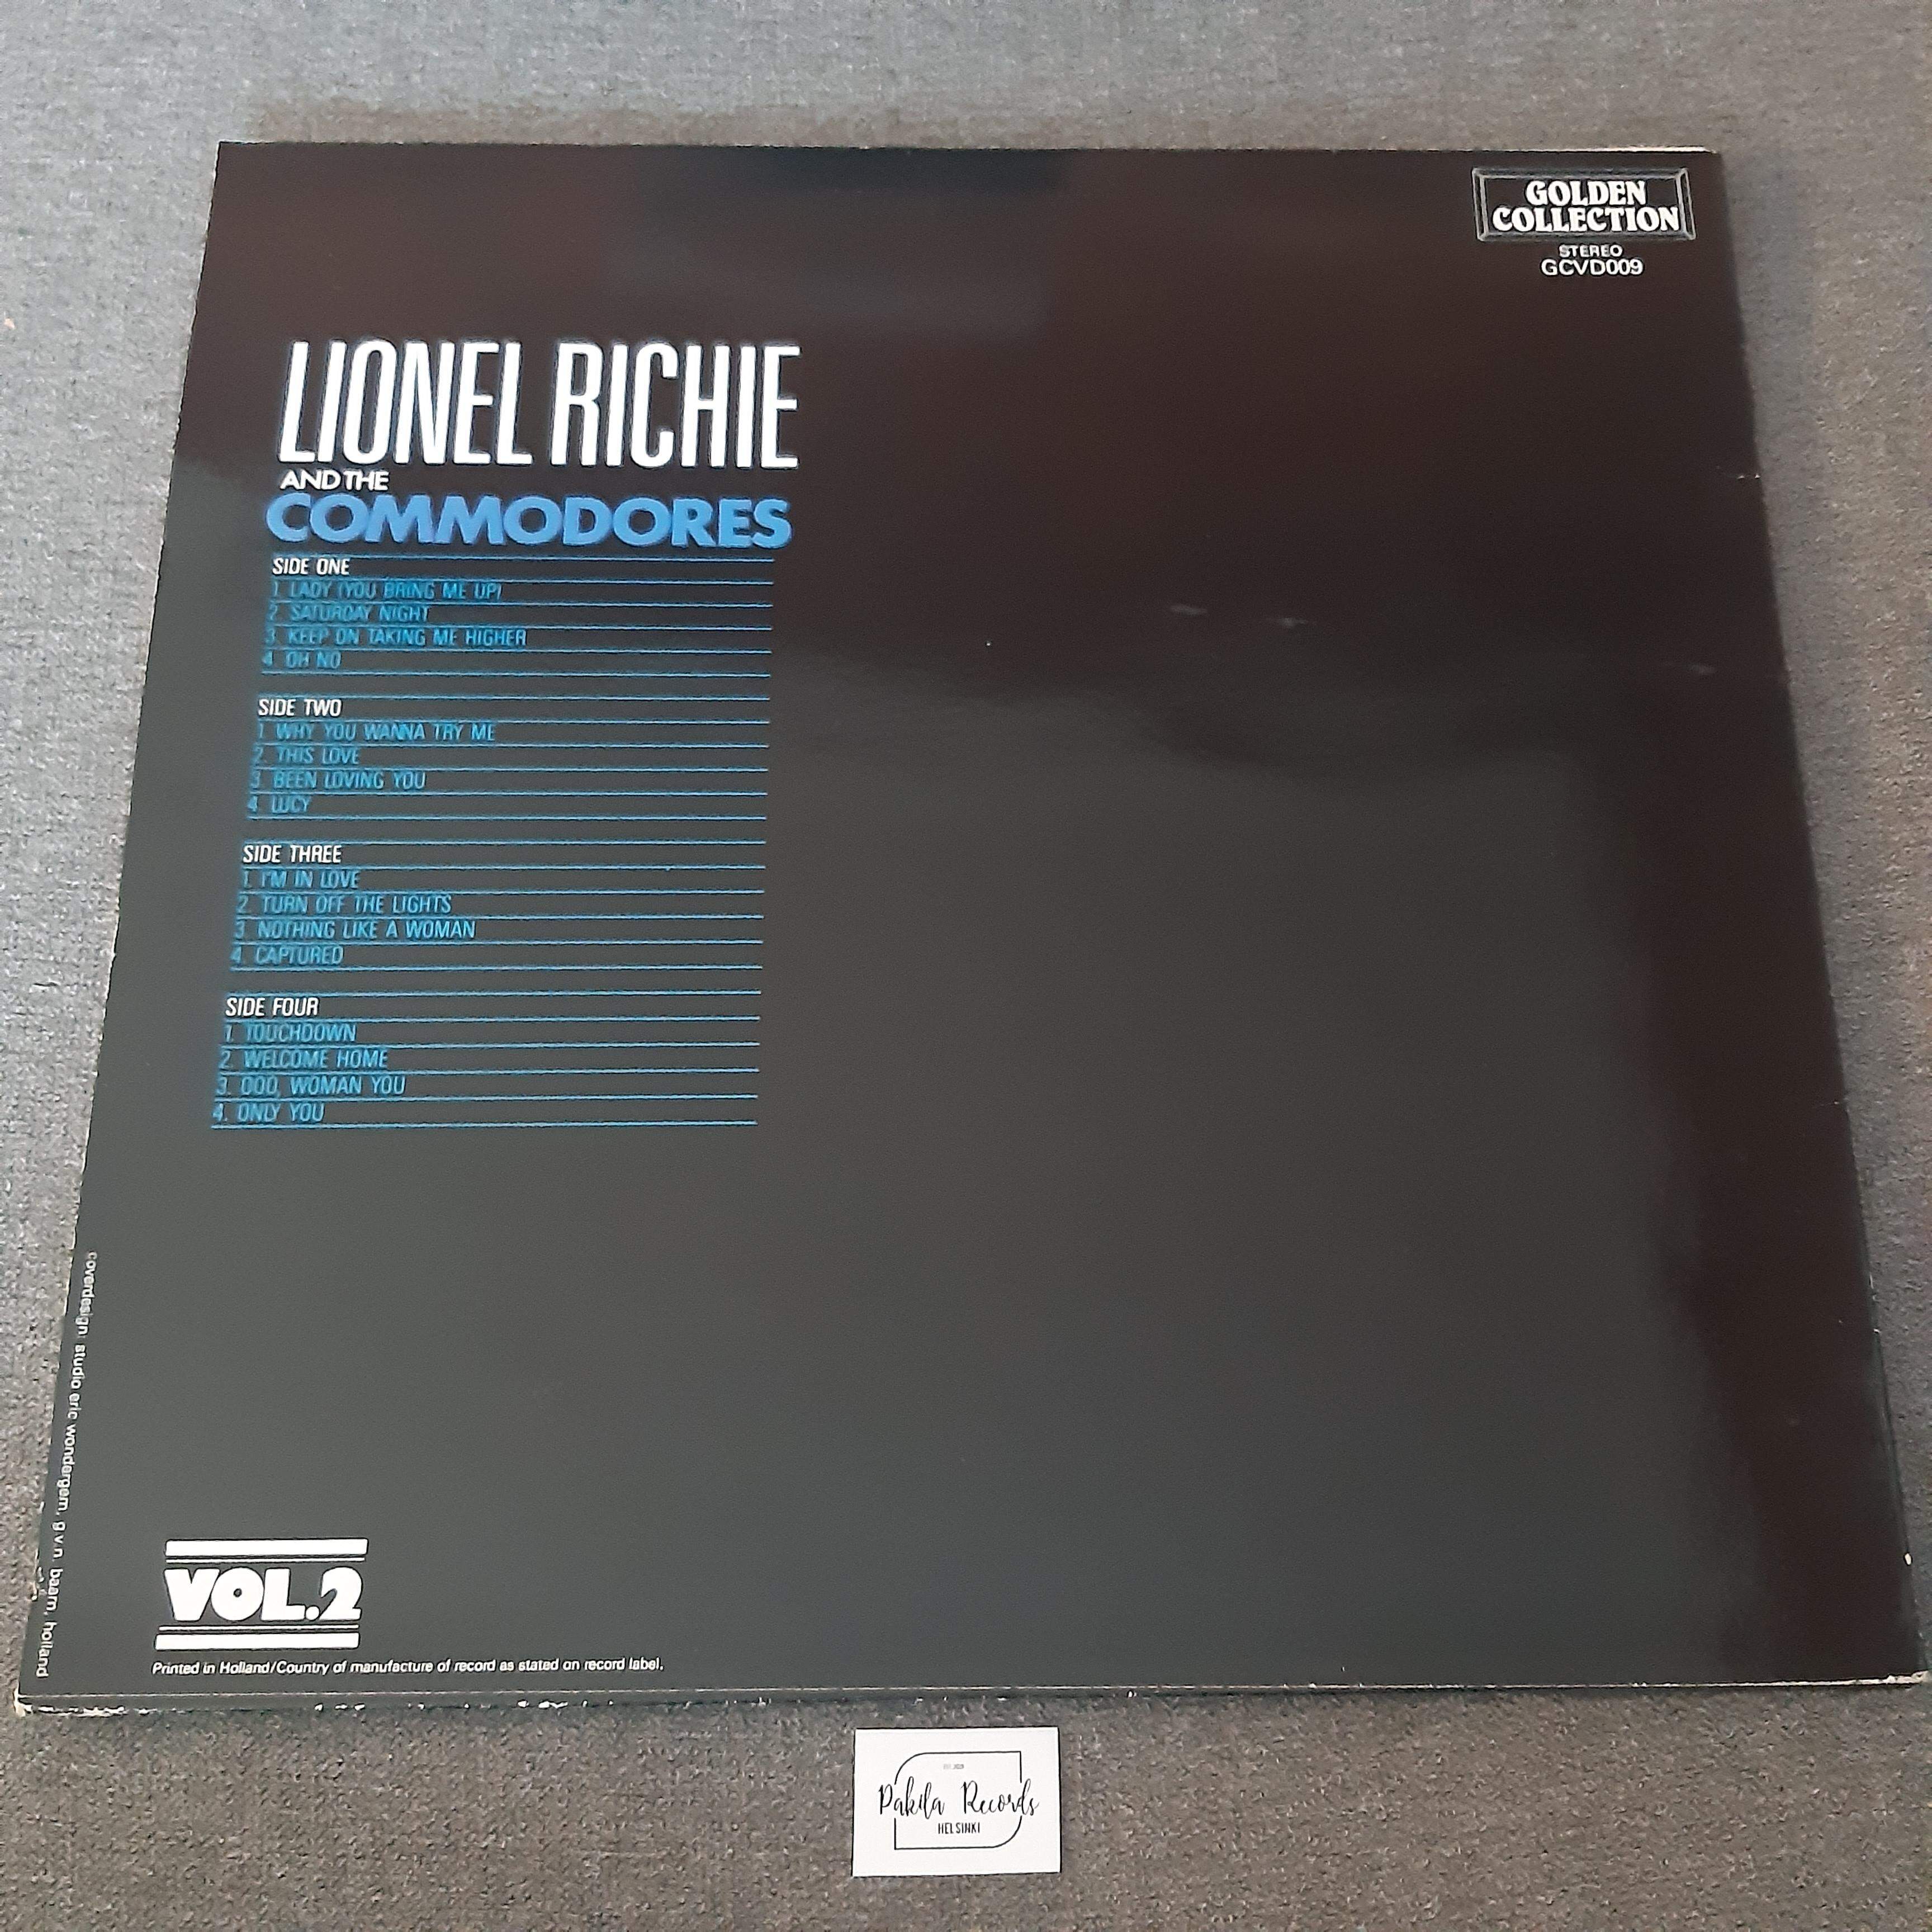 Lionel Richie And The Commodores - Golden Collection Vol. 2 - 2 LP (käytetty)